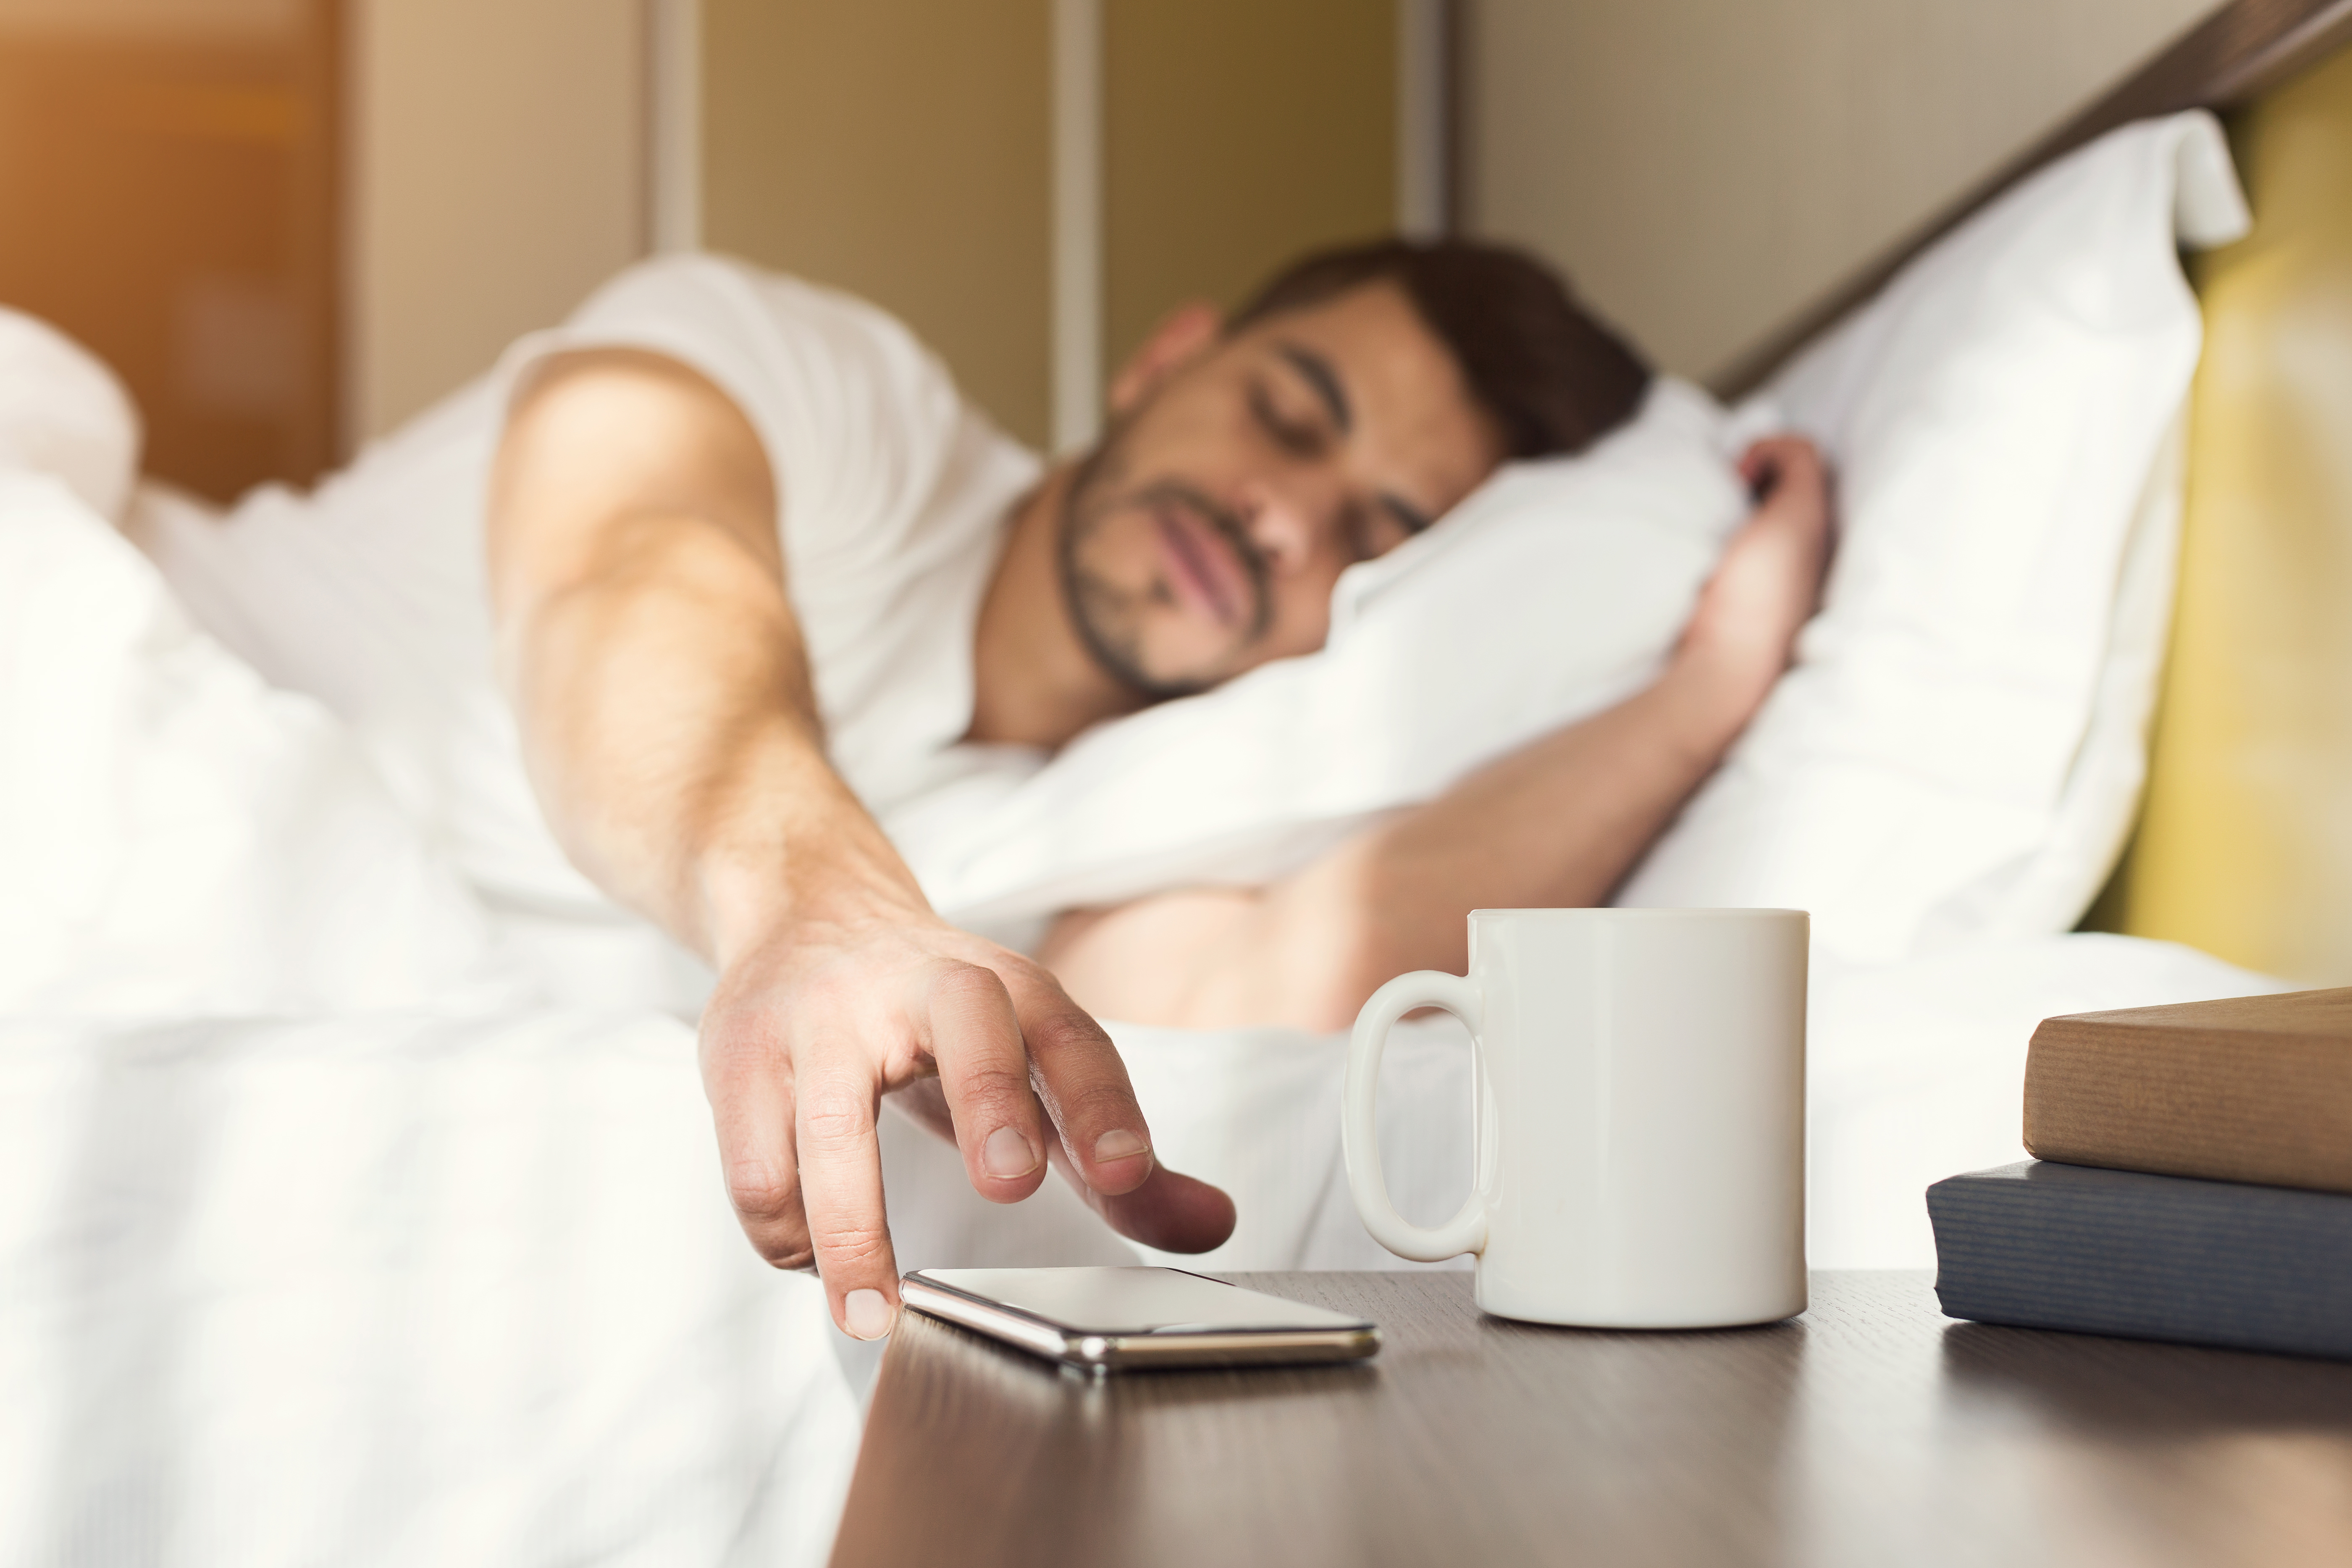 Sleepy guy waking up early after hearing alarm clock signal on smartphone. | Source: Shutterstock